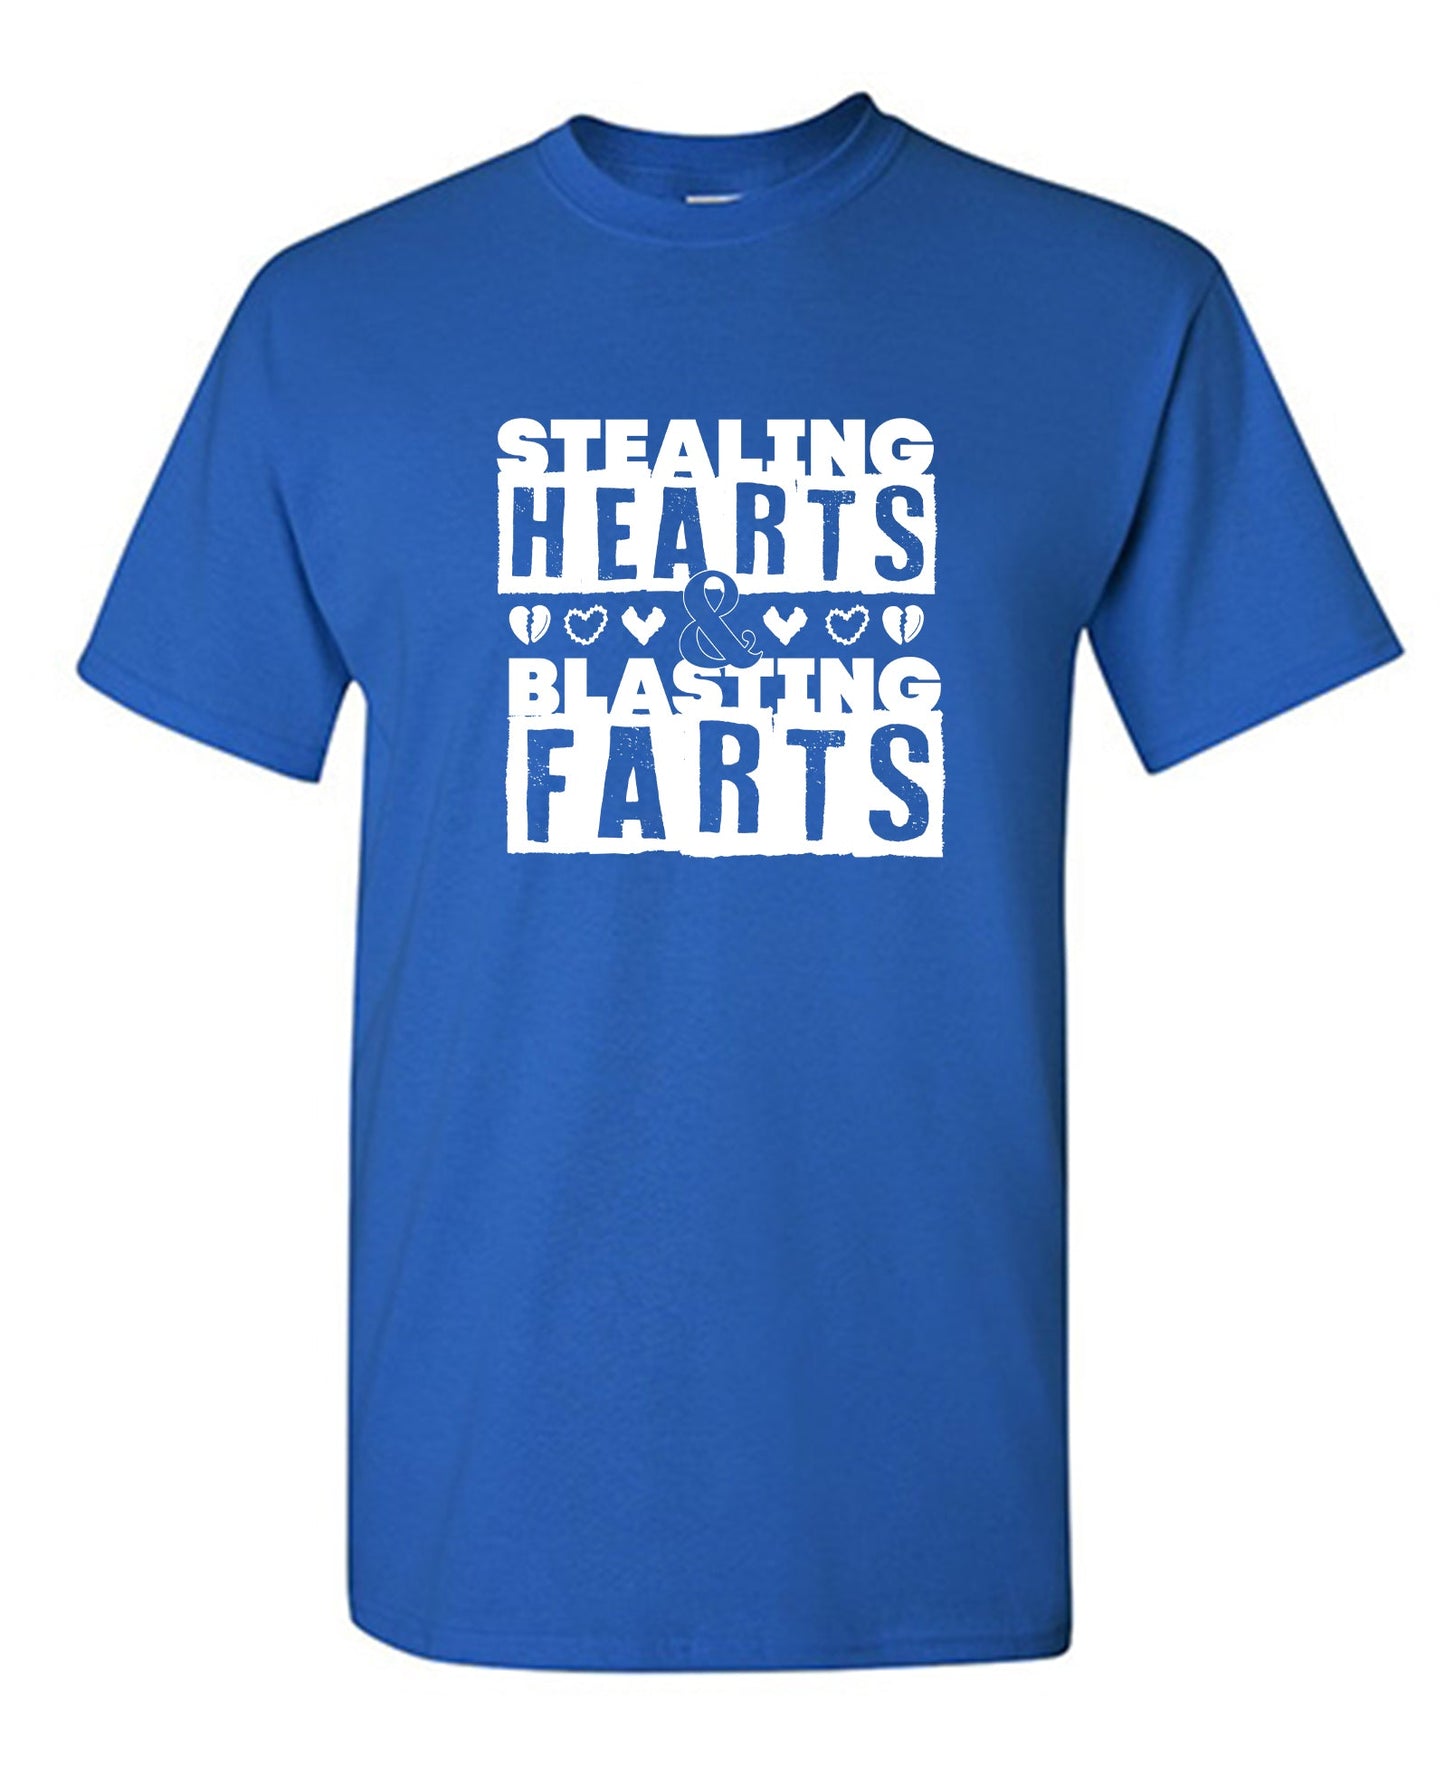 Funny T-Shirts design "Stealing Hearts and Blasting Farts"